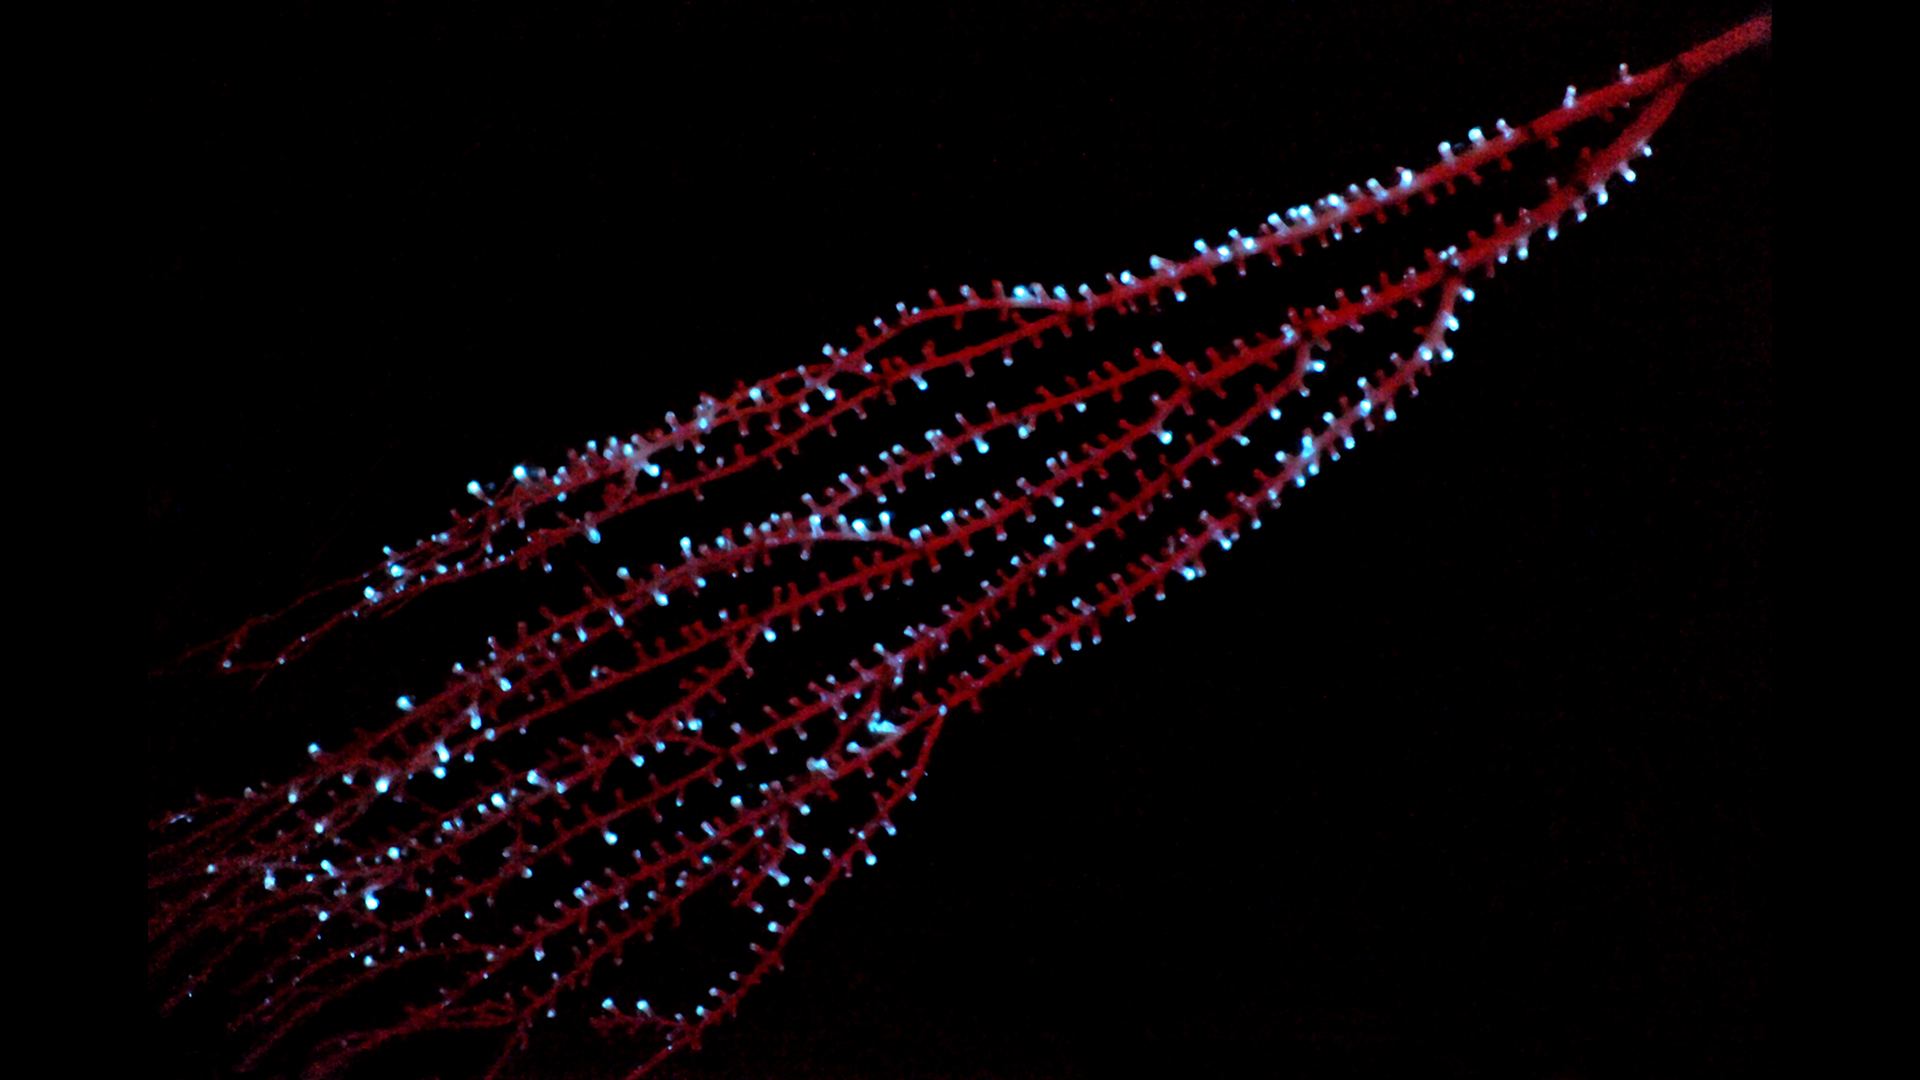 The bamboo octocoral Isidella sp. displaying bioluminescence in the Bahamas in 2009.